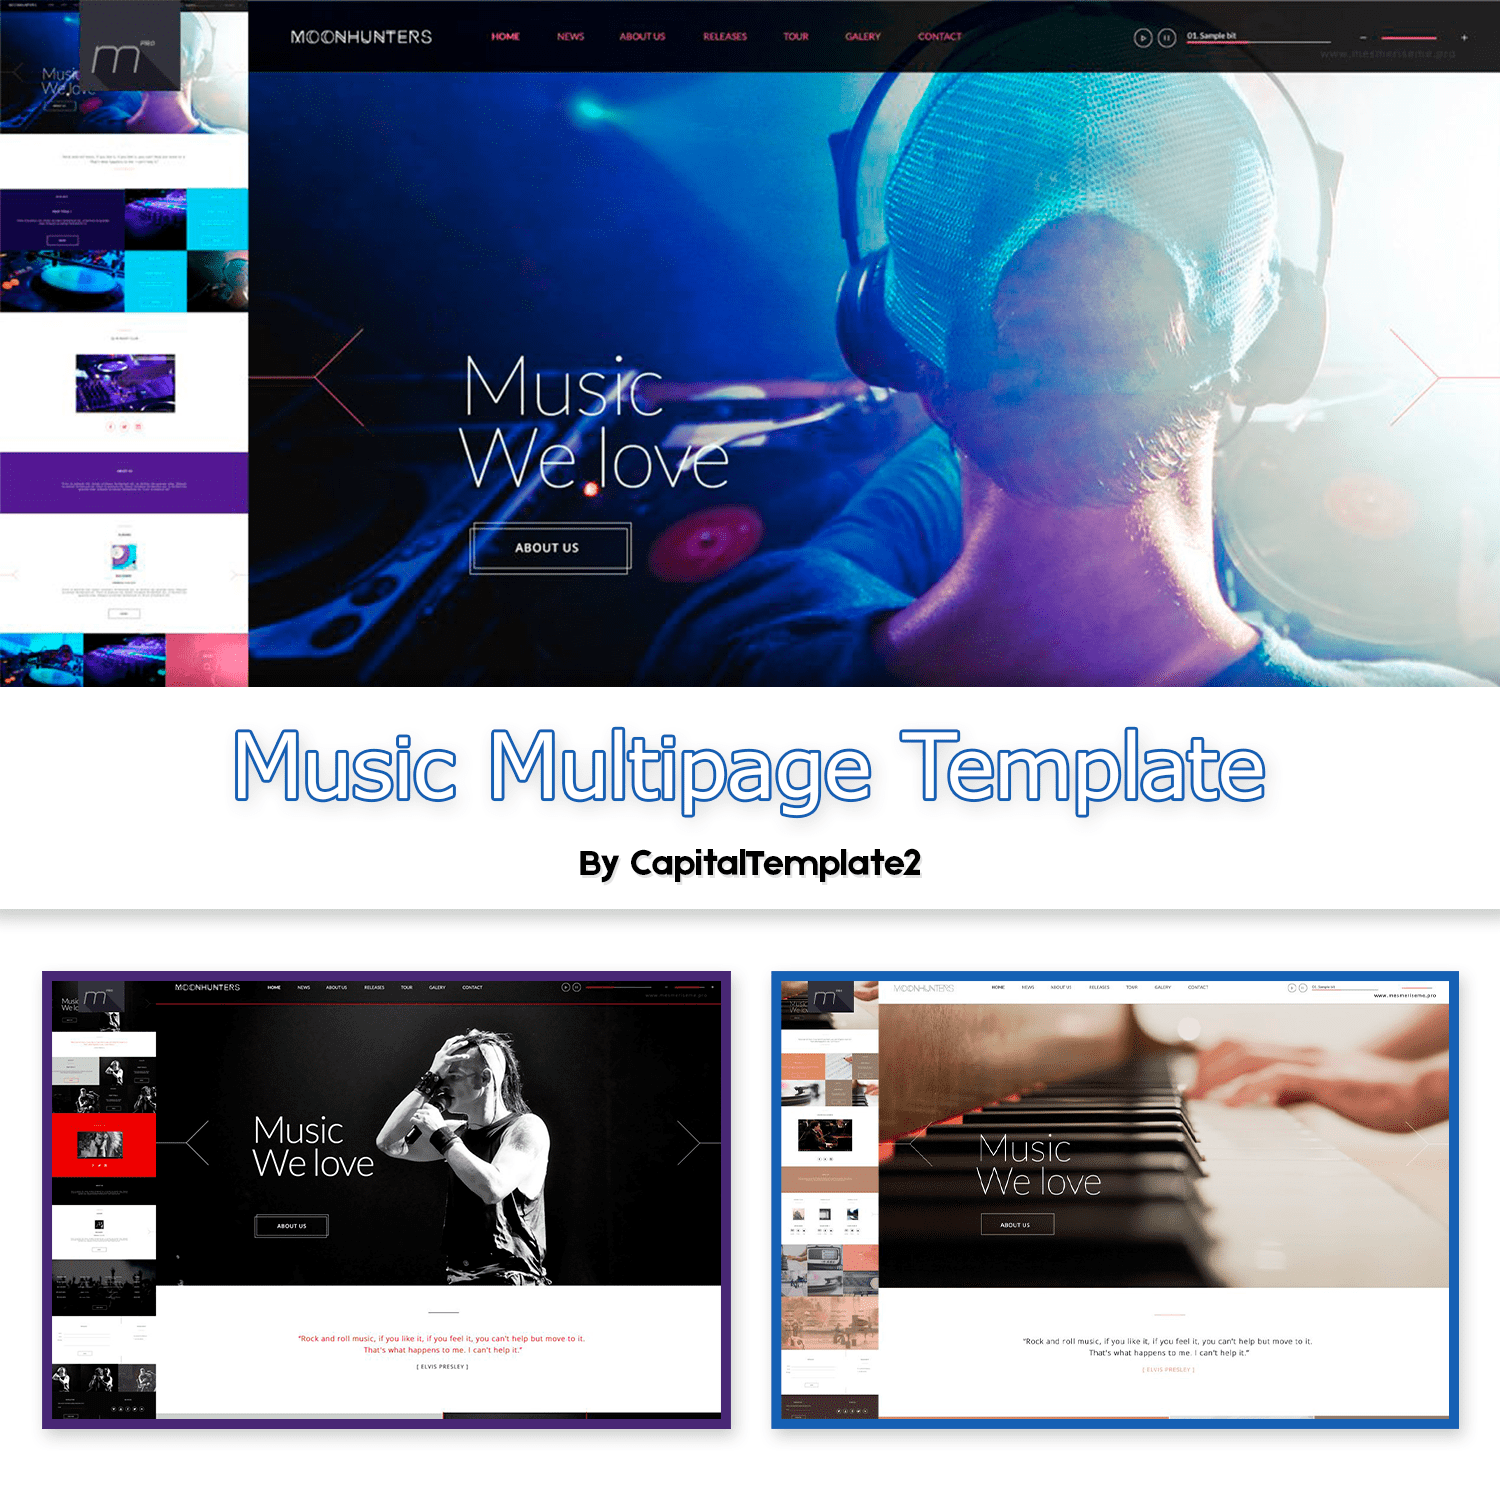 Music Multipage Template cover.